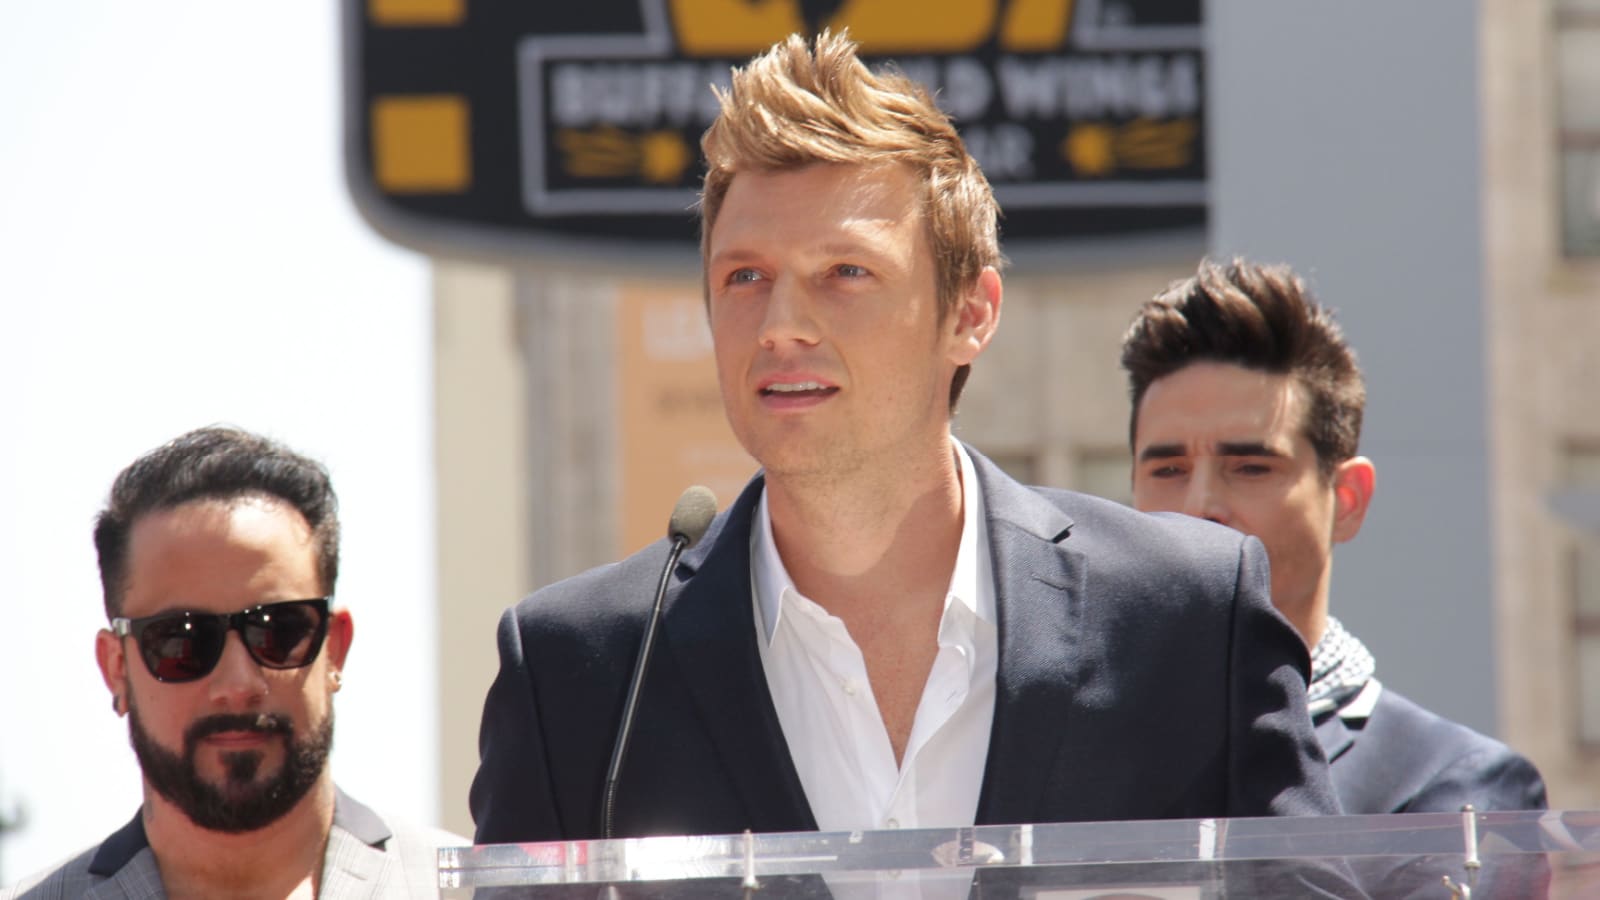 LOS ANGELES - APR 22: Nick Carter at the ceremony for the "Backstreet Boys" Star on the Walk of Fame at the Hollywood Walk of Fame on April 22, 2013 in Los Angeles, CA